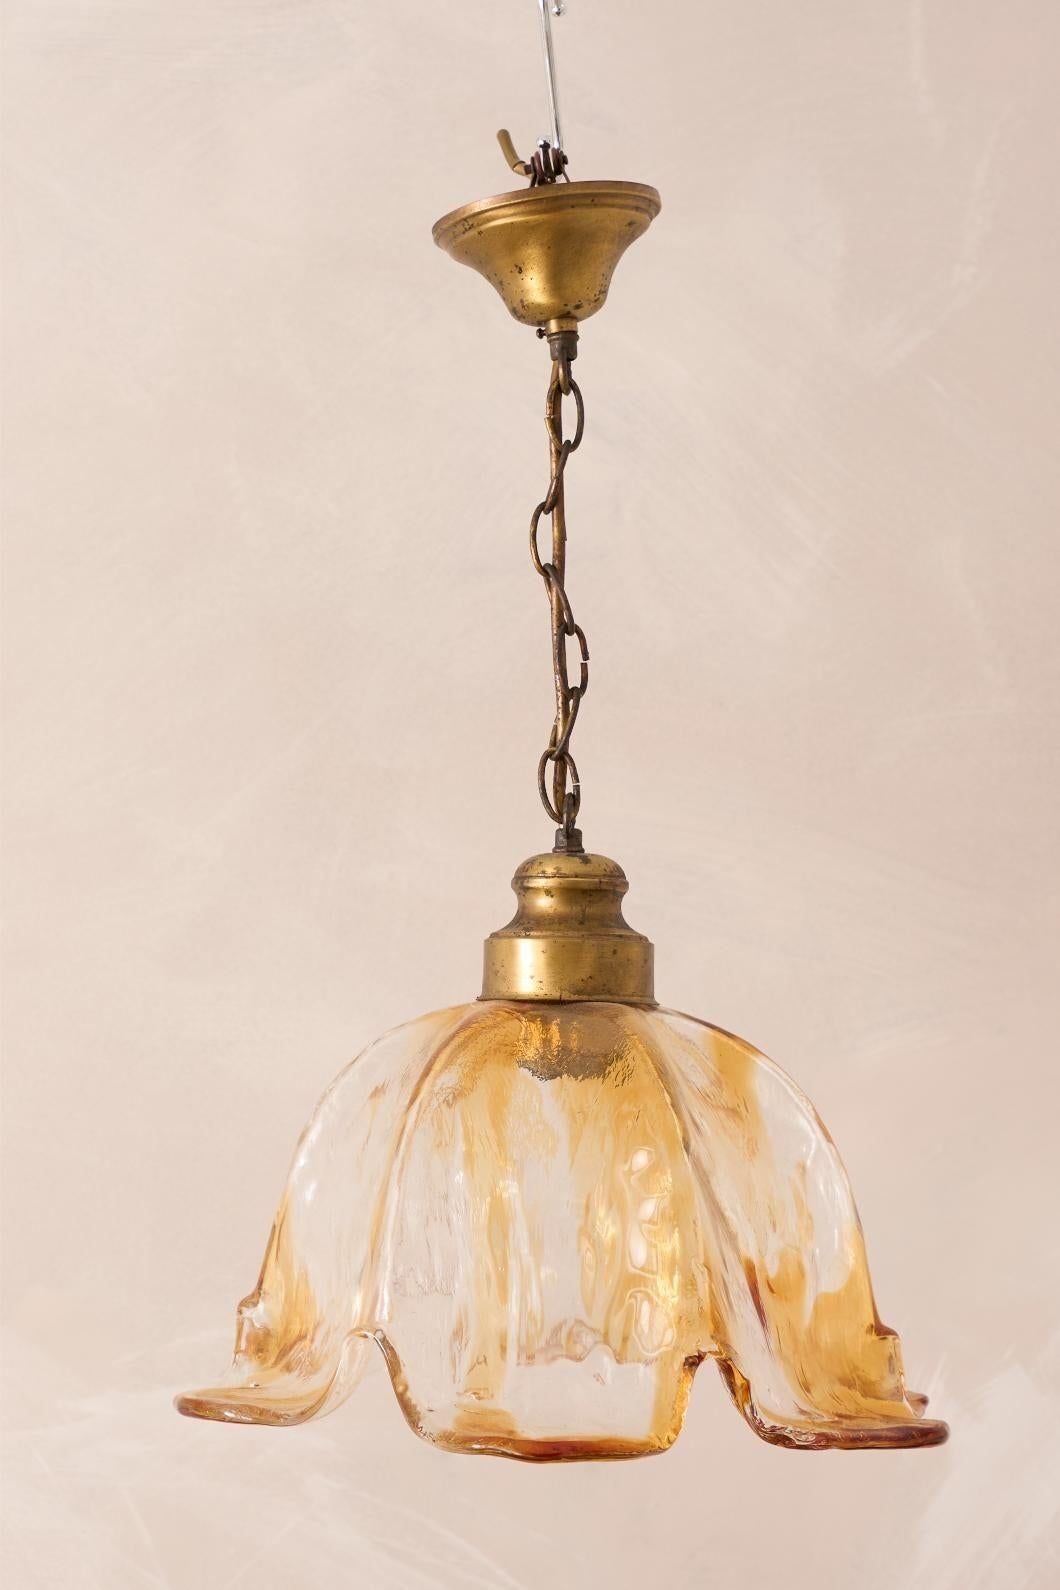 These are stunning mid century Spanish amber glass pendant lights in a tulip shape. All of these are in very good condition and are entirely hand blown. The size is very nice and each comes with the original gilt metal gallery.
Can be wired to any